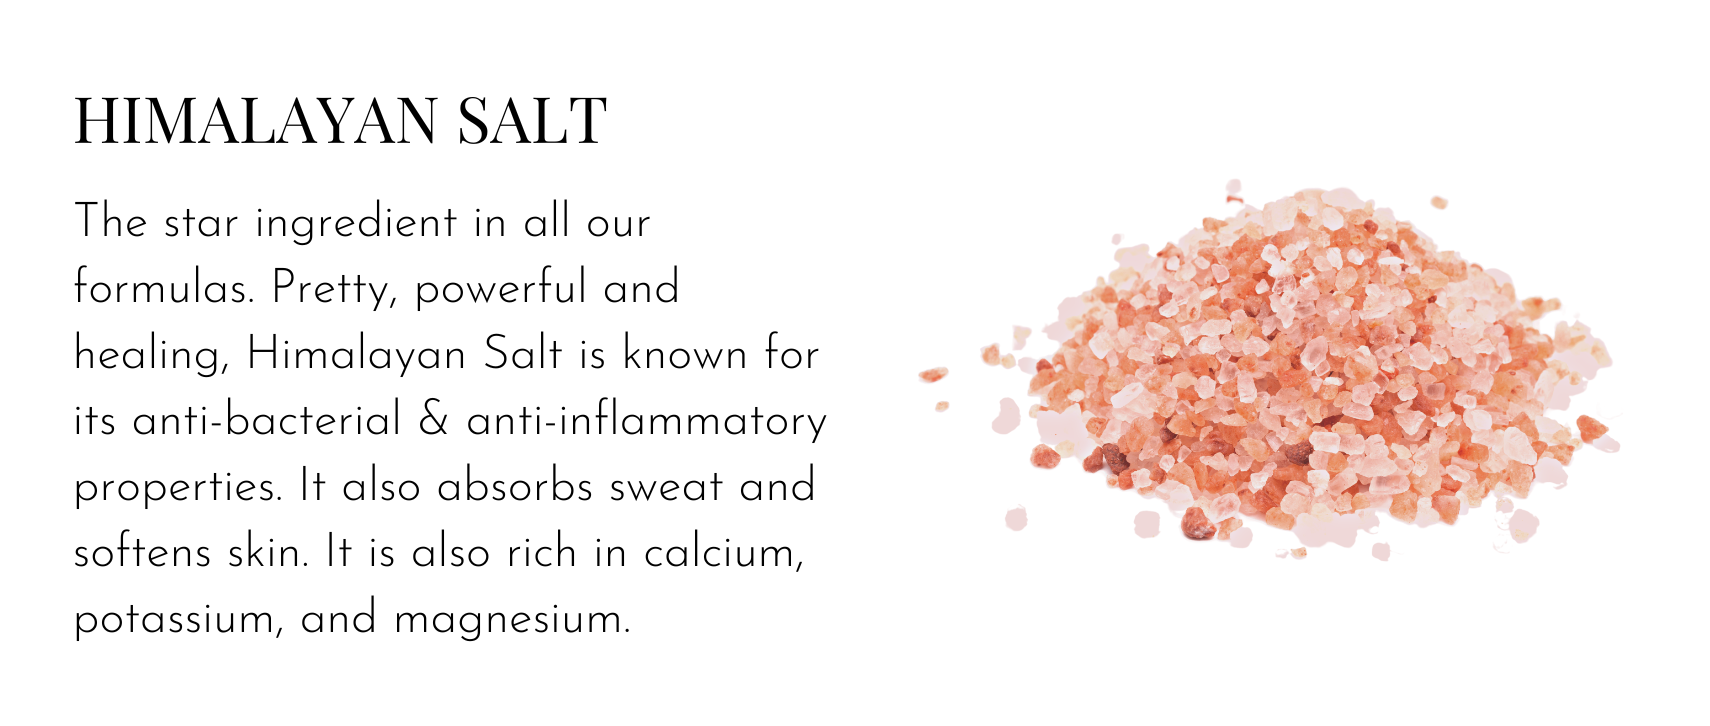 Himalayan Salt – The star ingredient in all our formulas. Pretty, powerful and healing, Himalayan Salt is known for its anti-bacterial & anti-inflammatory properties. It also absorbs sweat and softens skin. It is also rich in calcium, potassium, and magnesium.